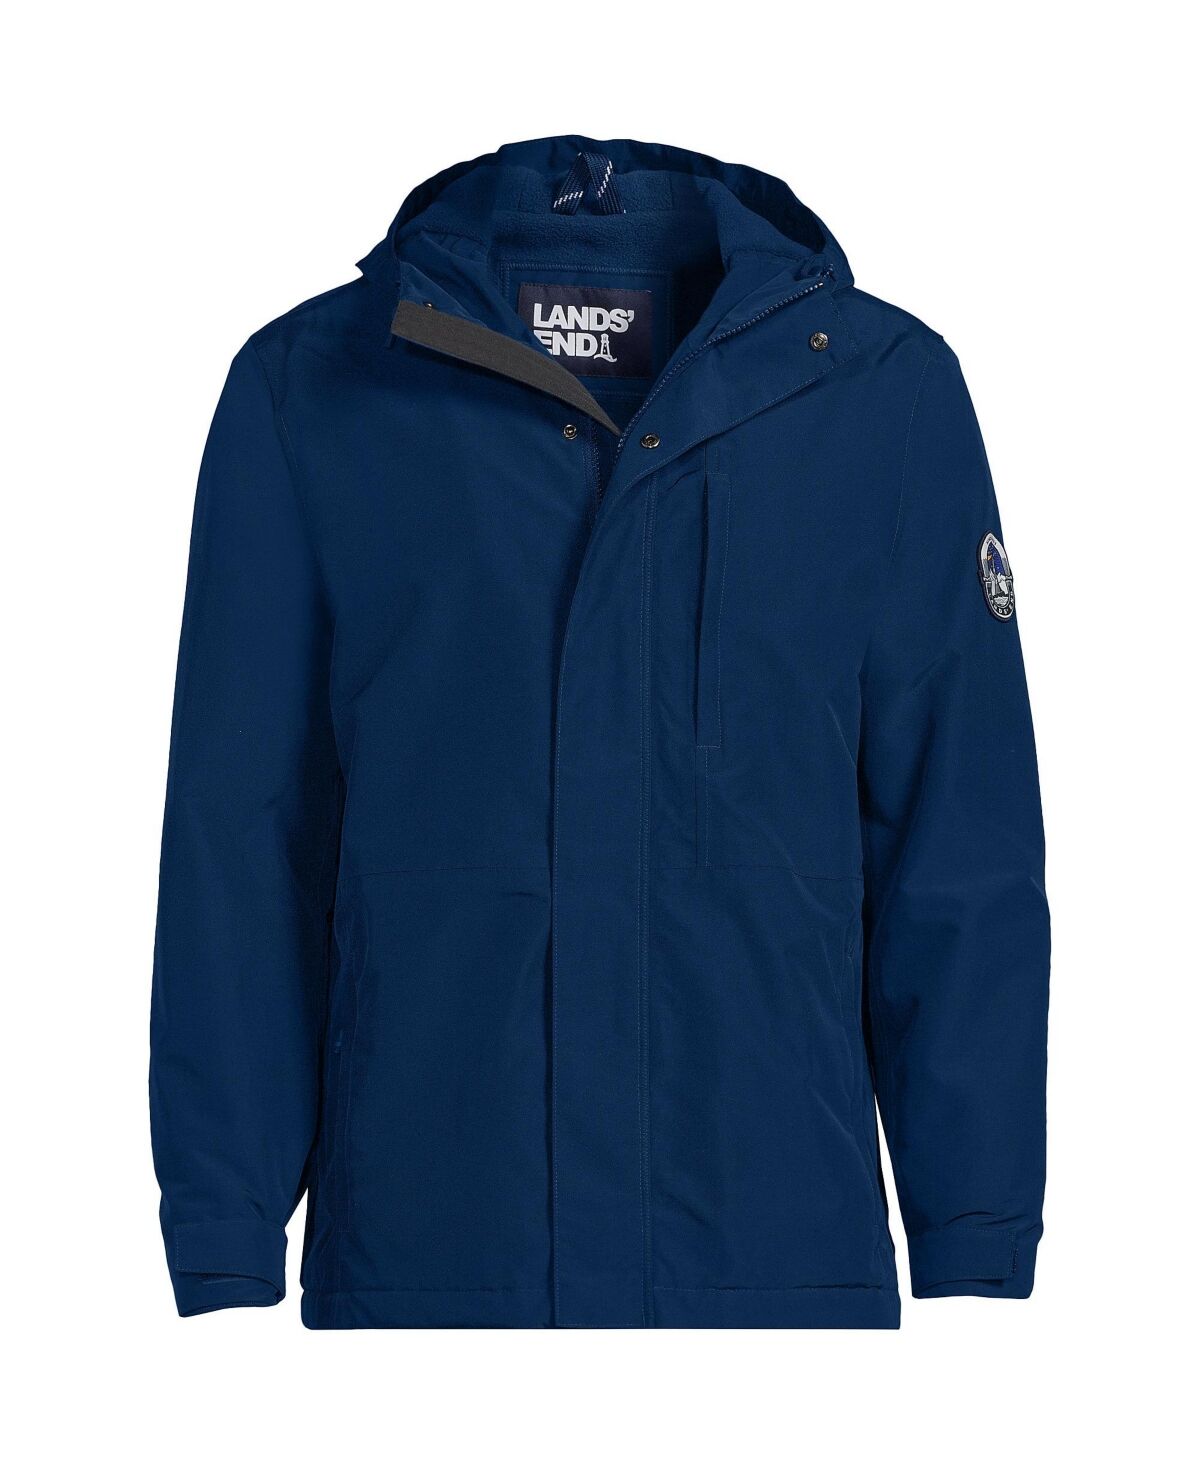 Lands' End Men's Tall Squall Waterproof Insulated Winter Jacket - Deep sea navy